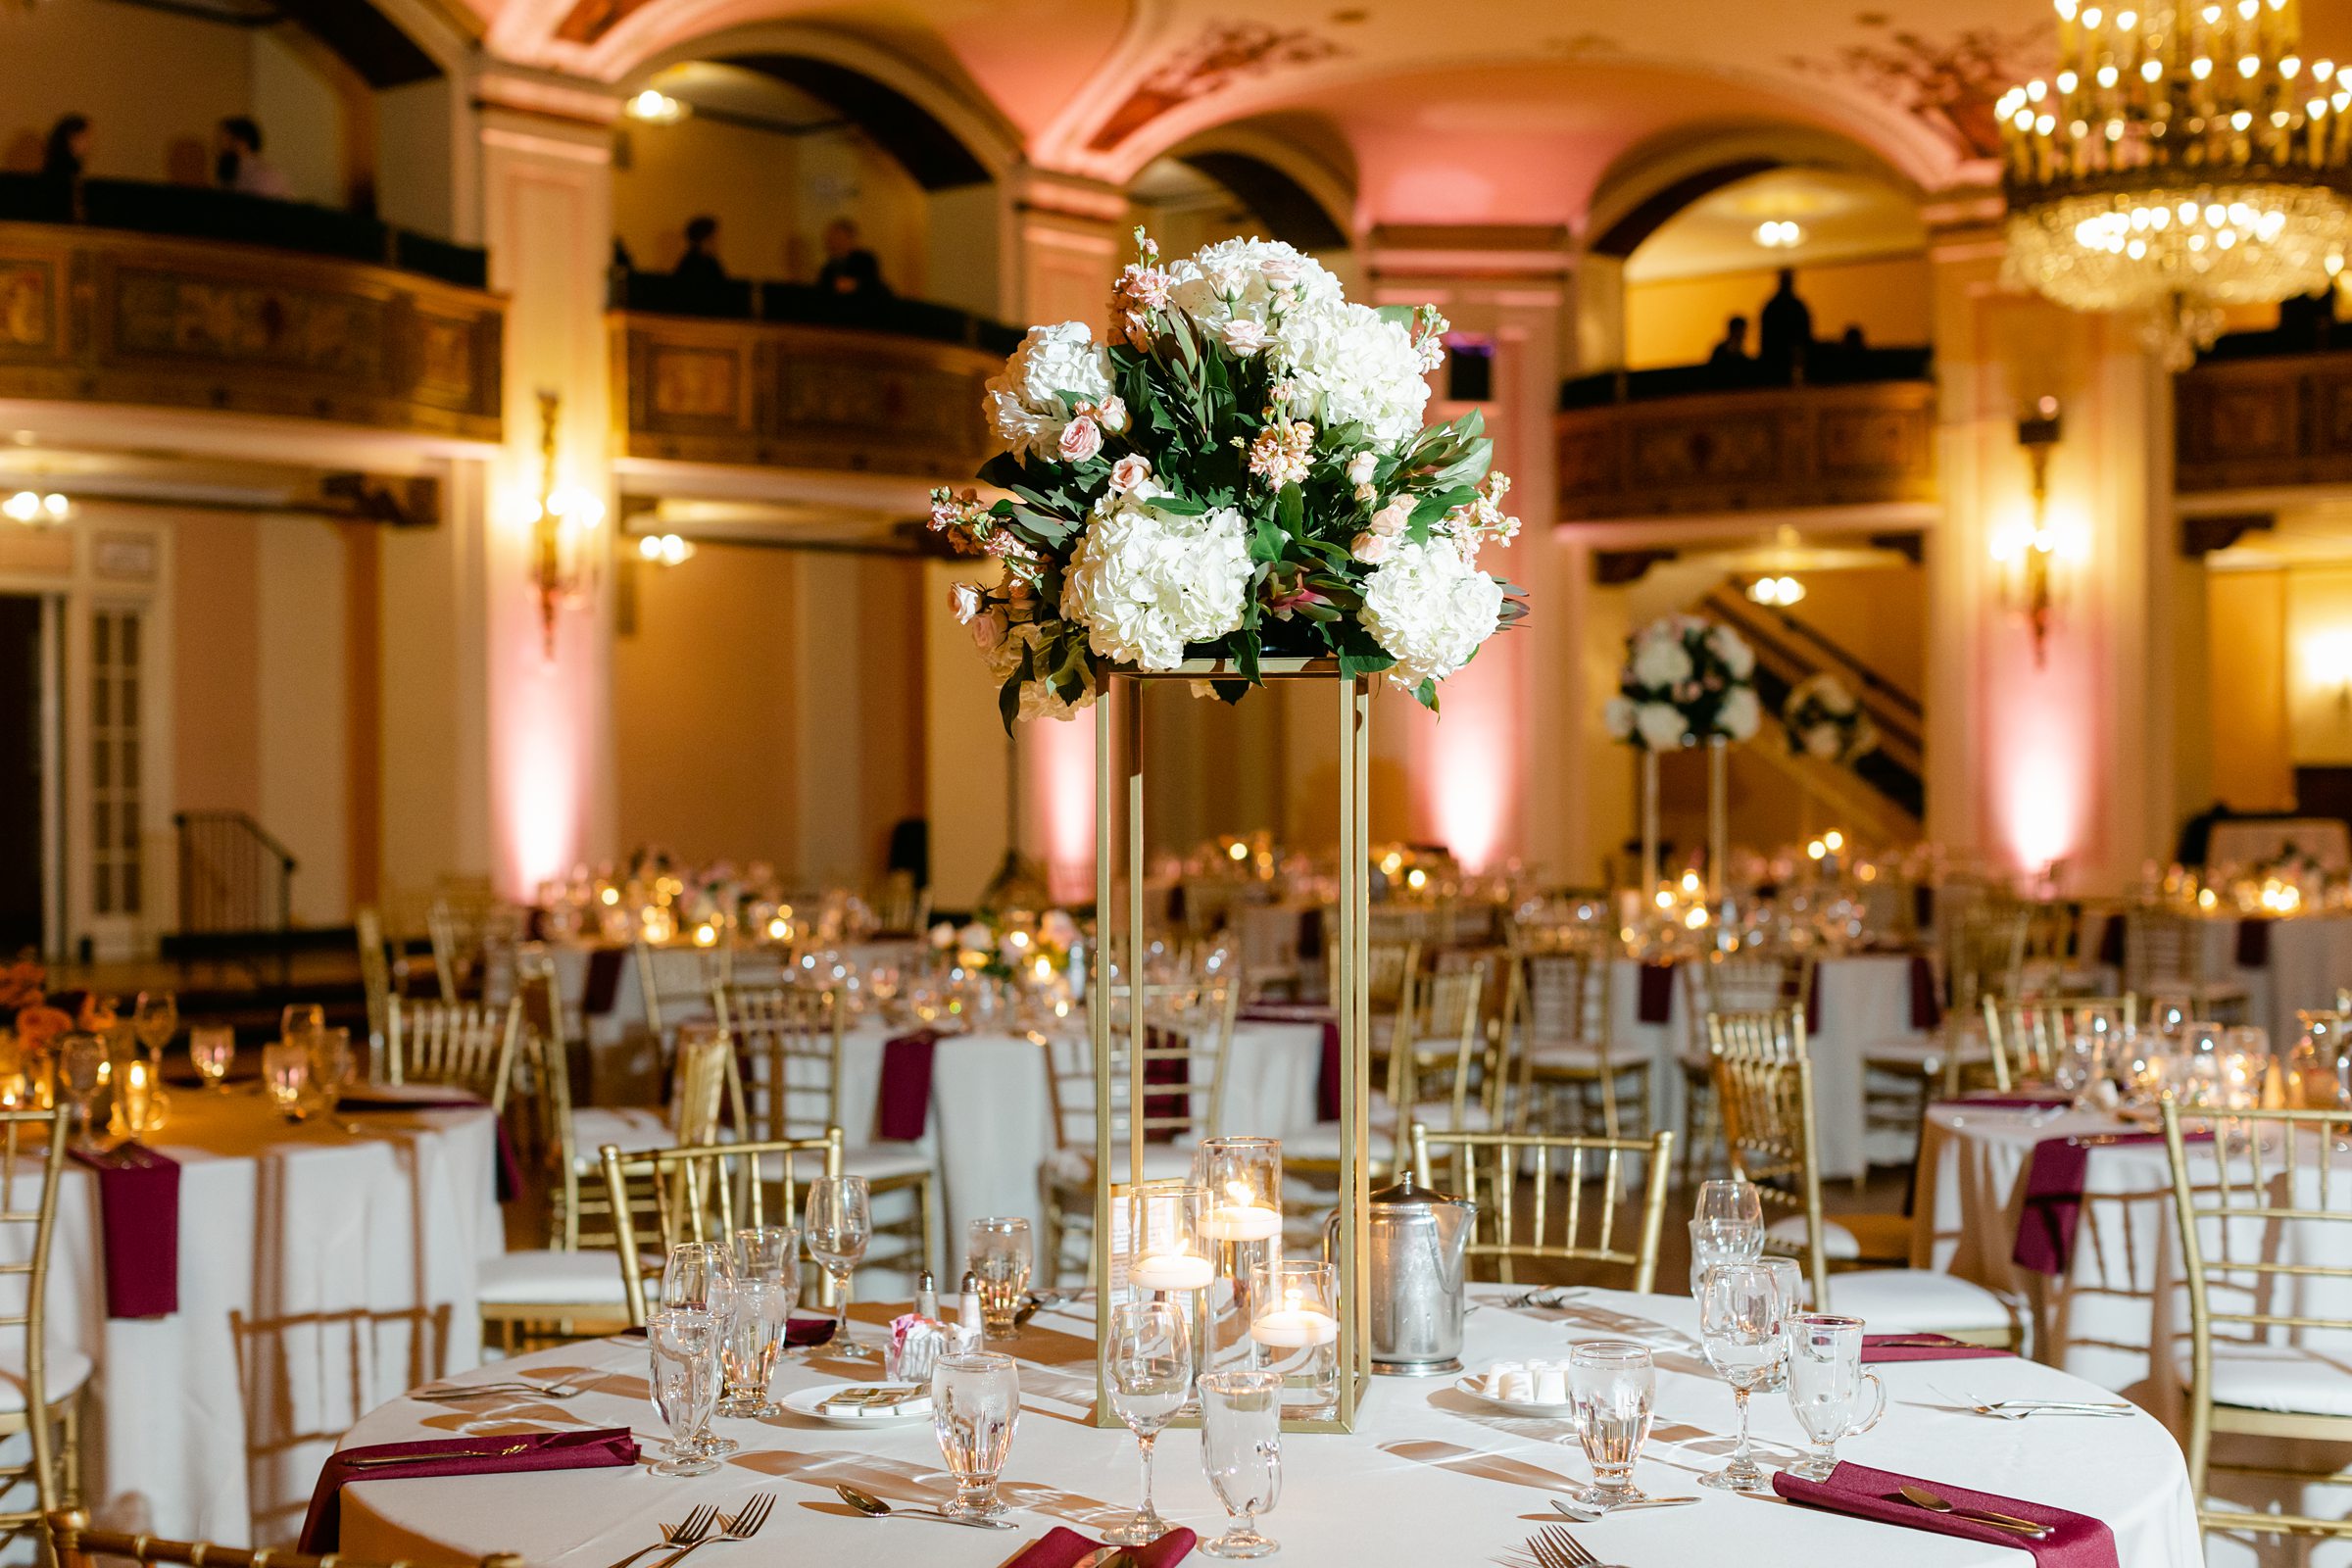 Beautiful decor and flower arrangement at the Masonic Temple ballroom in Detroit Michigan by Michele Maloney Photography